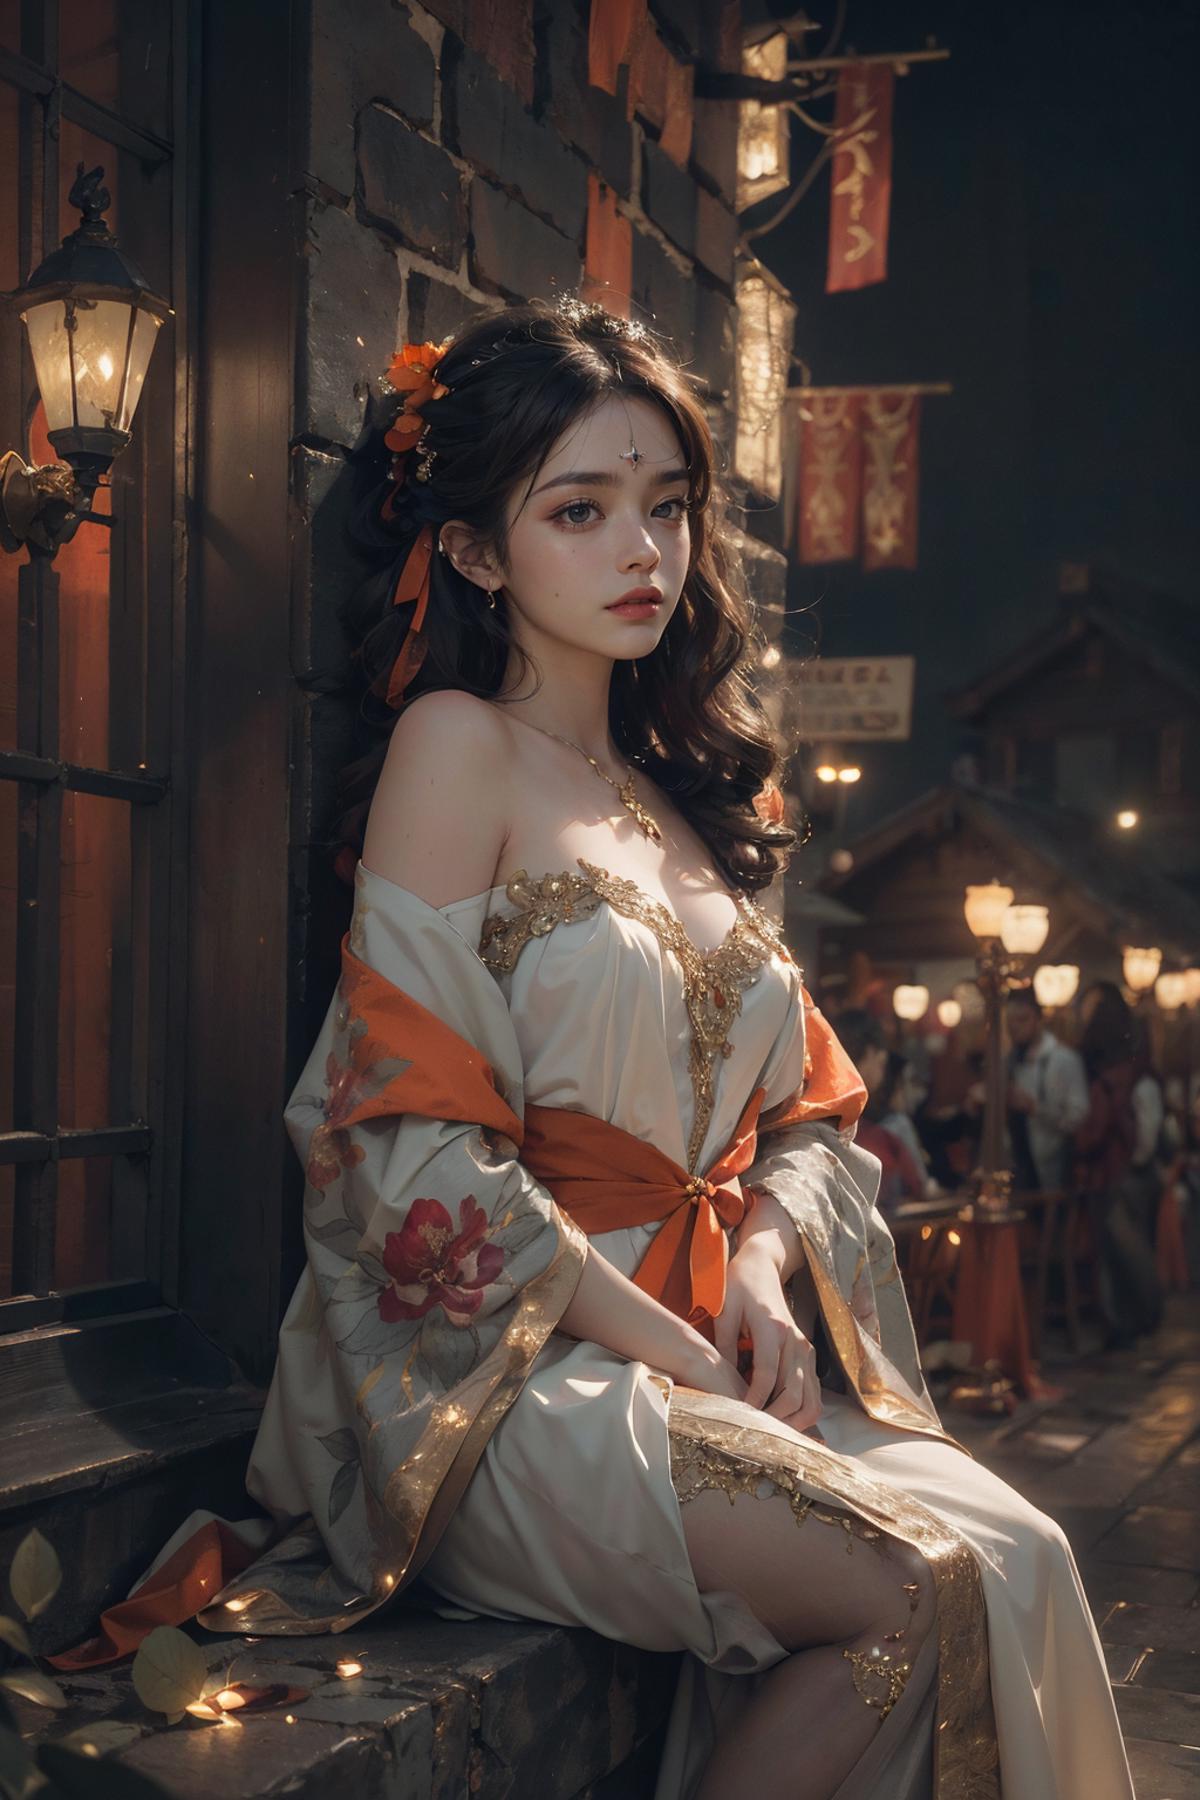 An Asian woman wearing an elegant white and gold dress is leaning against a wall in a town setting. The dress has a flowery design, and the woman's hair is in a ponytail. She is posing for the camera, creating a captivating scene.